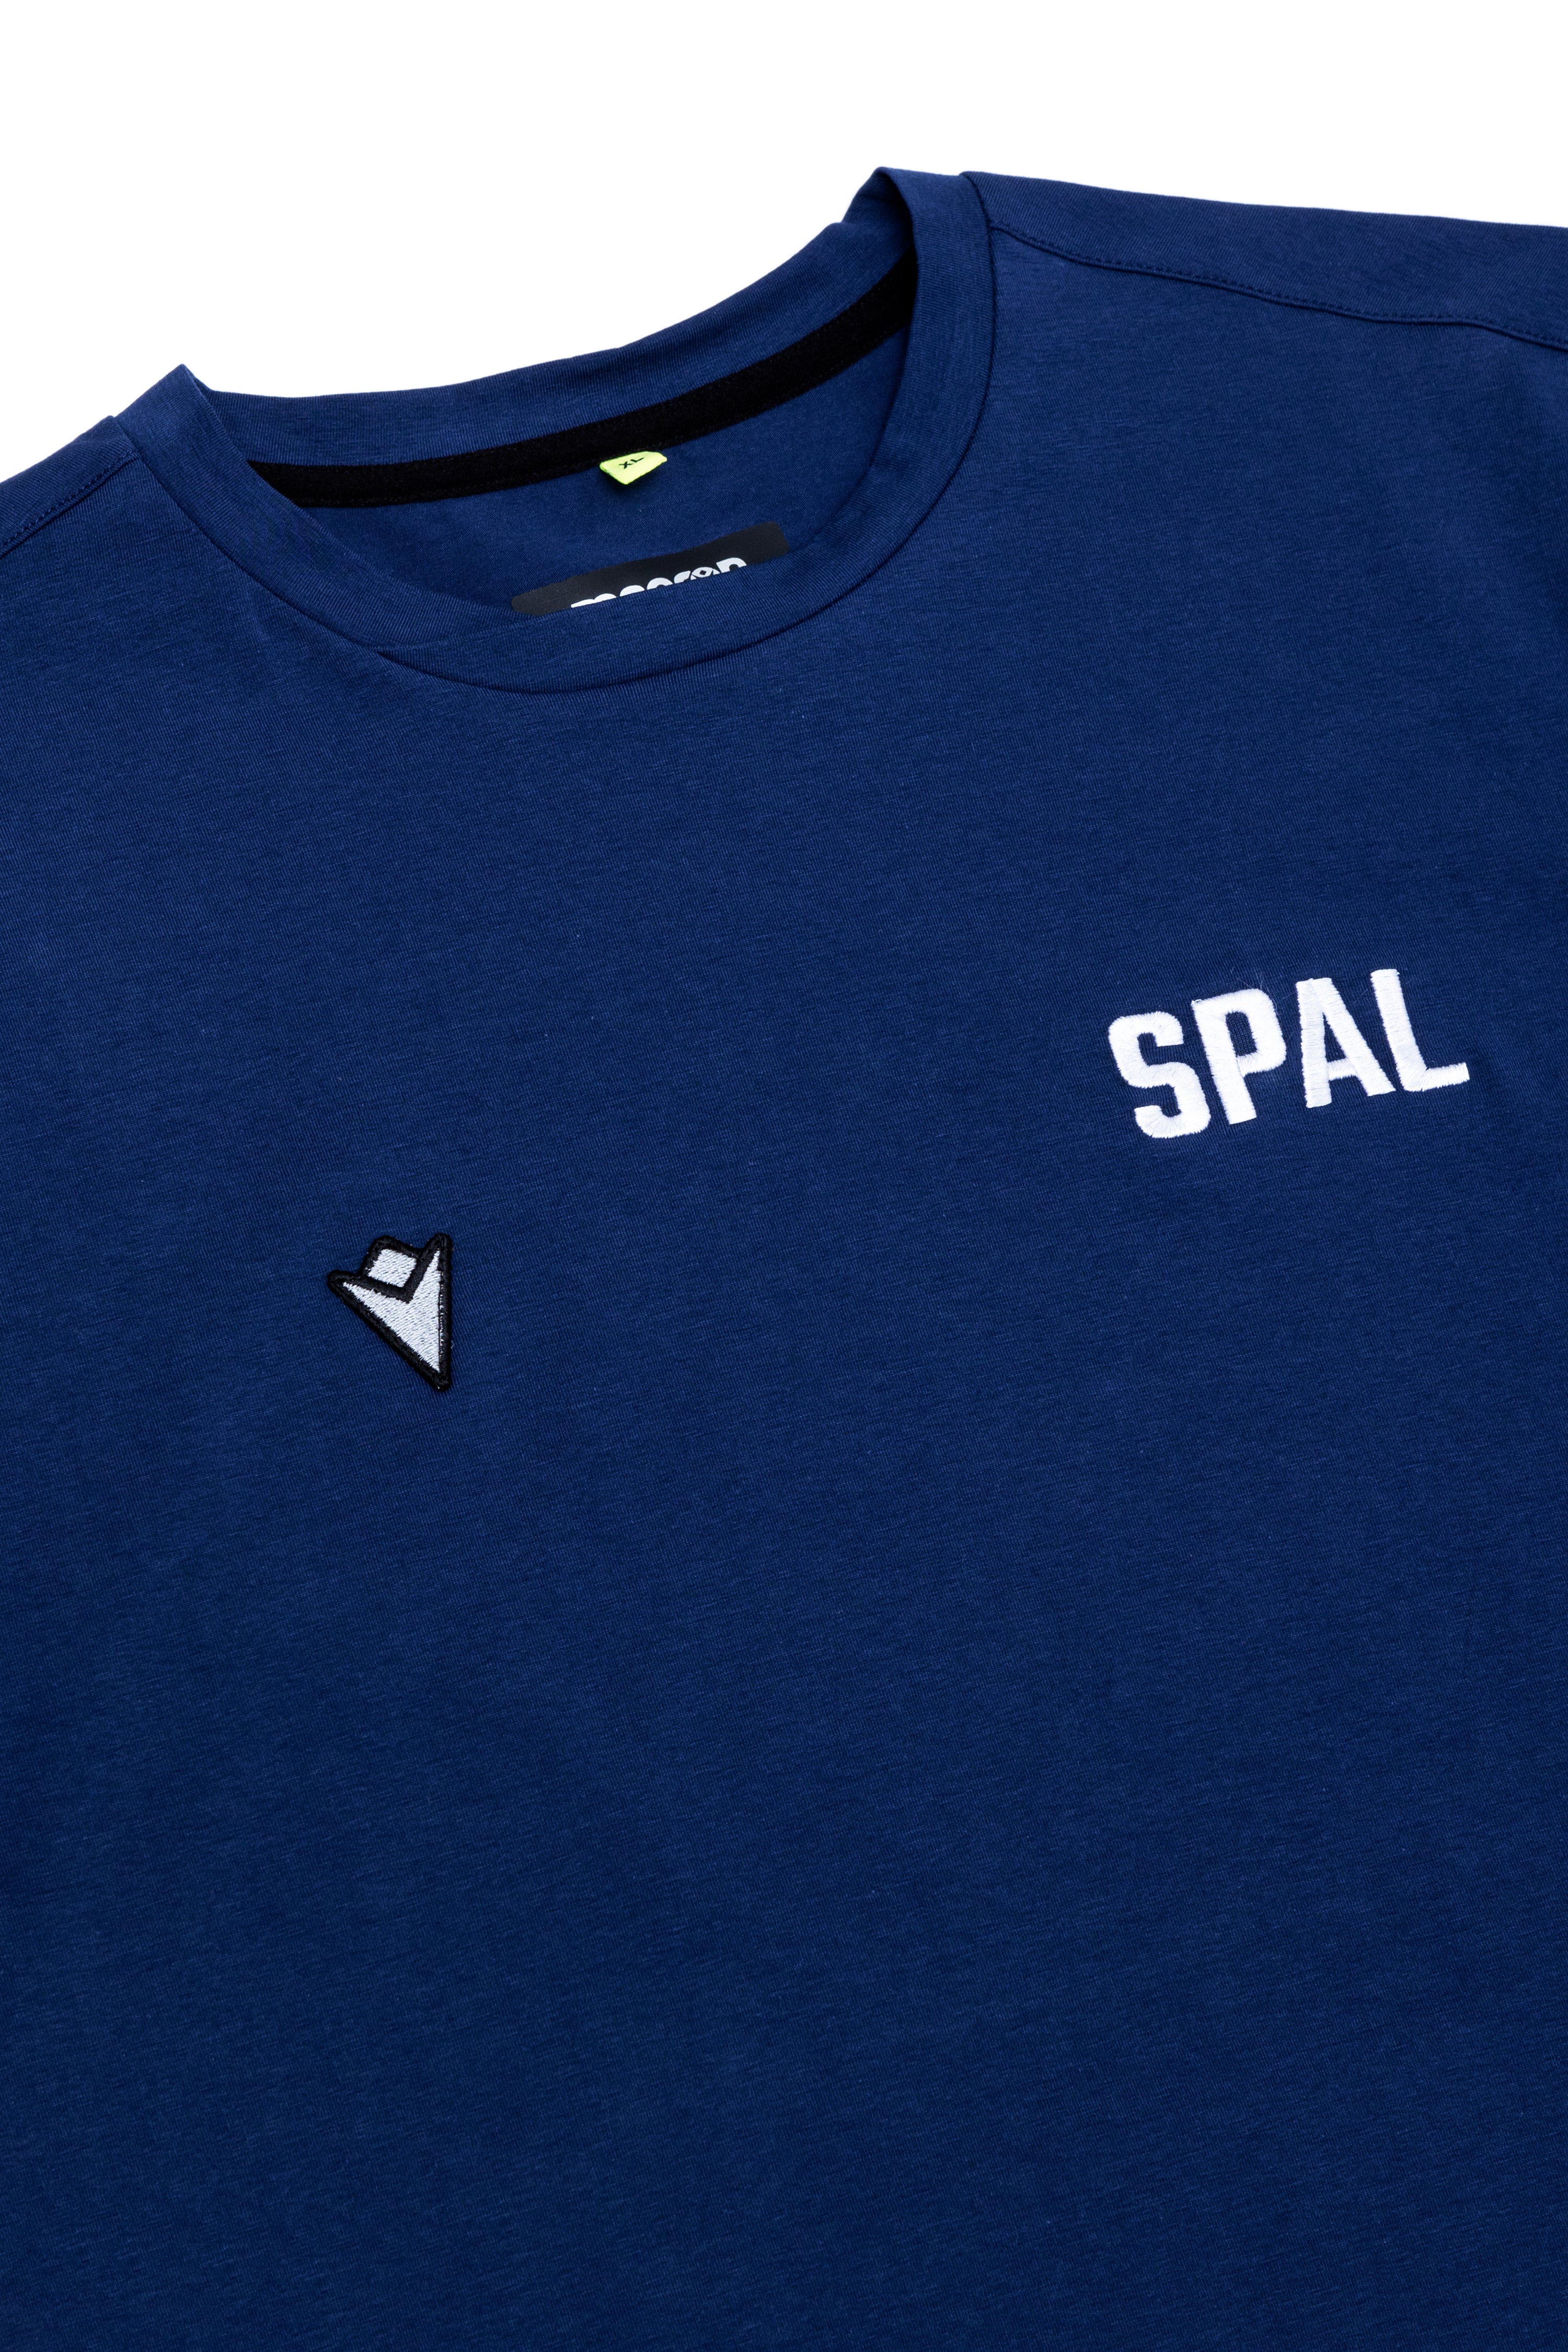 ATHLEISURE SS23 - T-Shirt SPAL navy